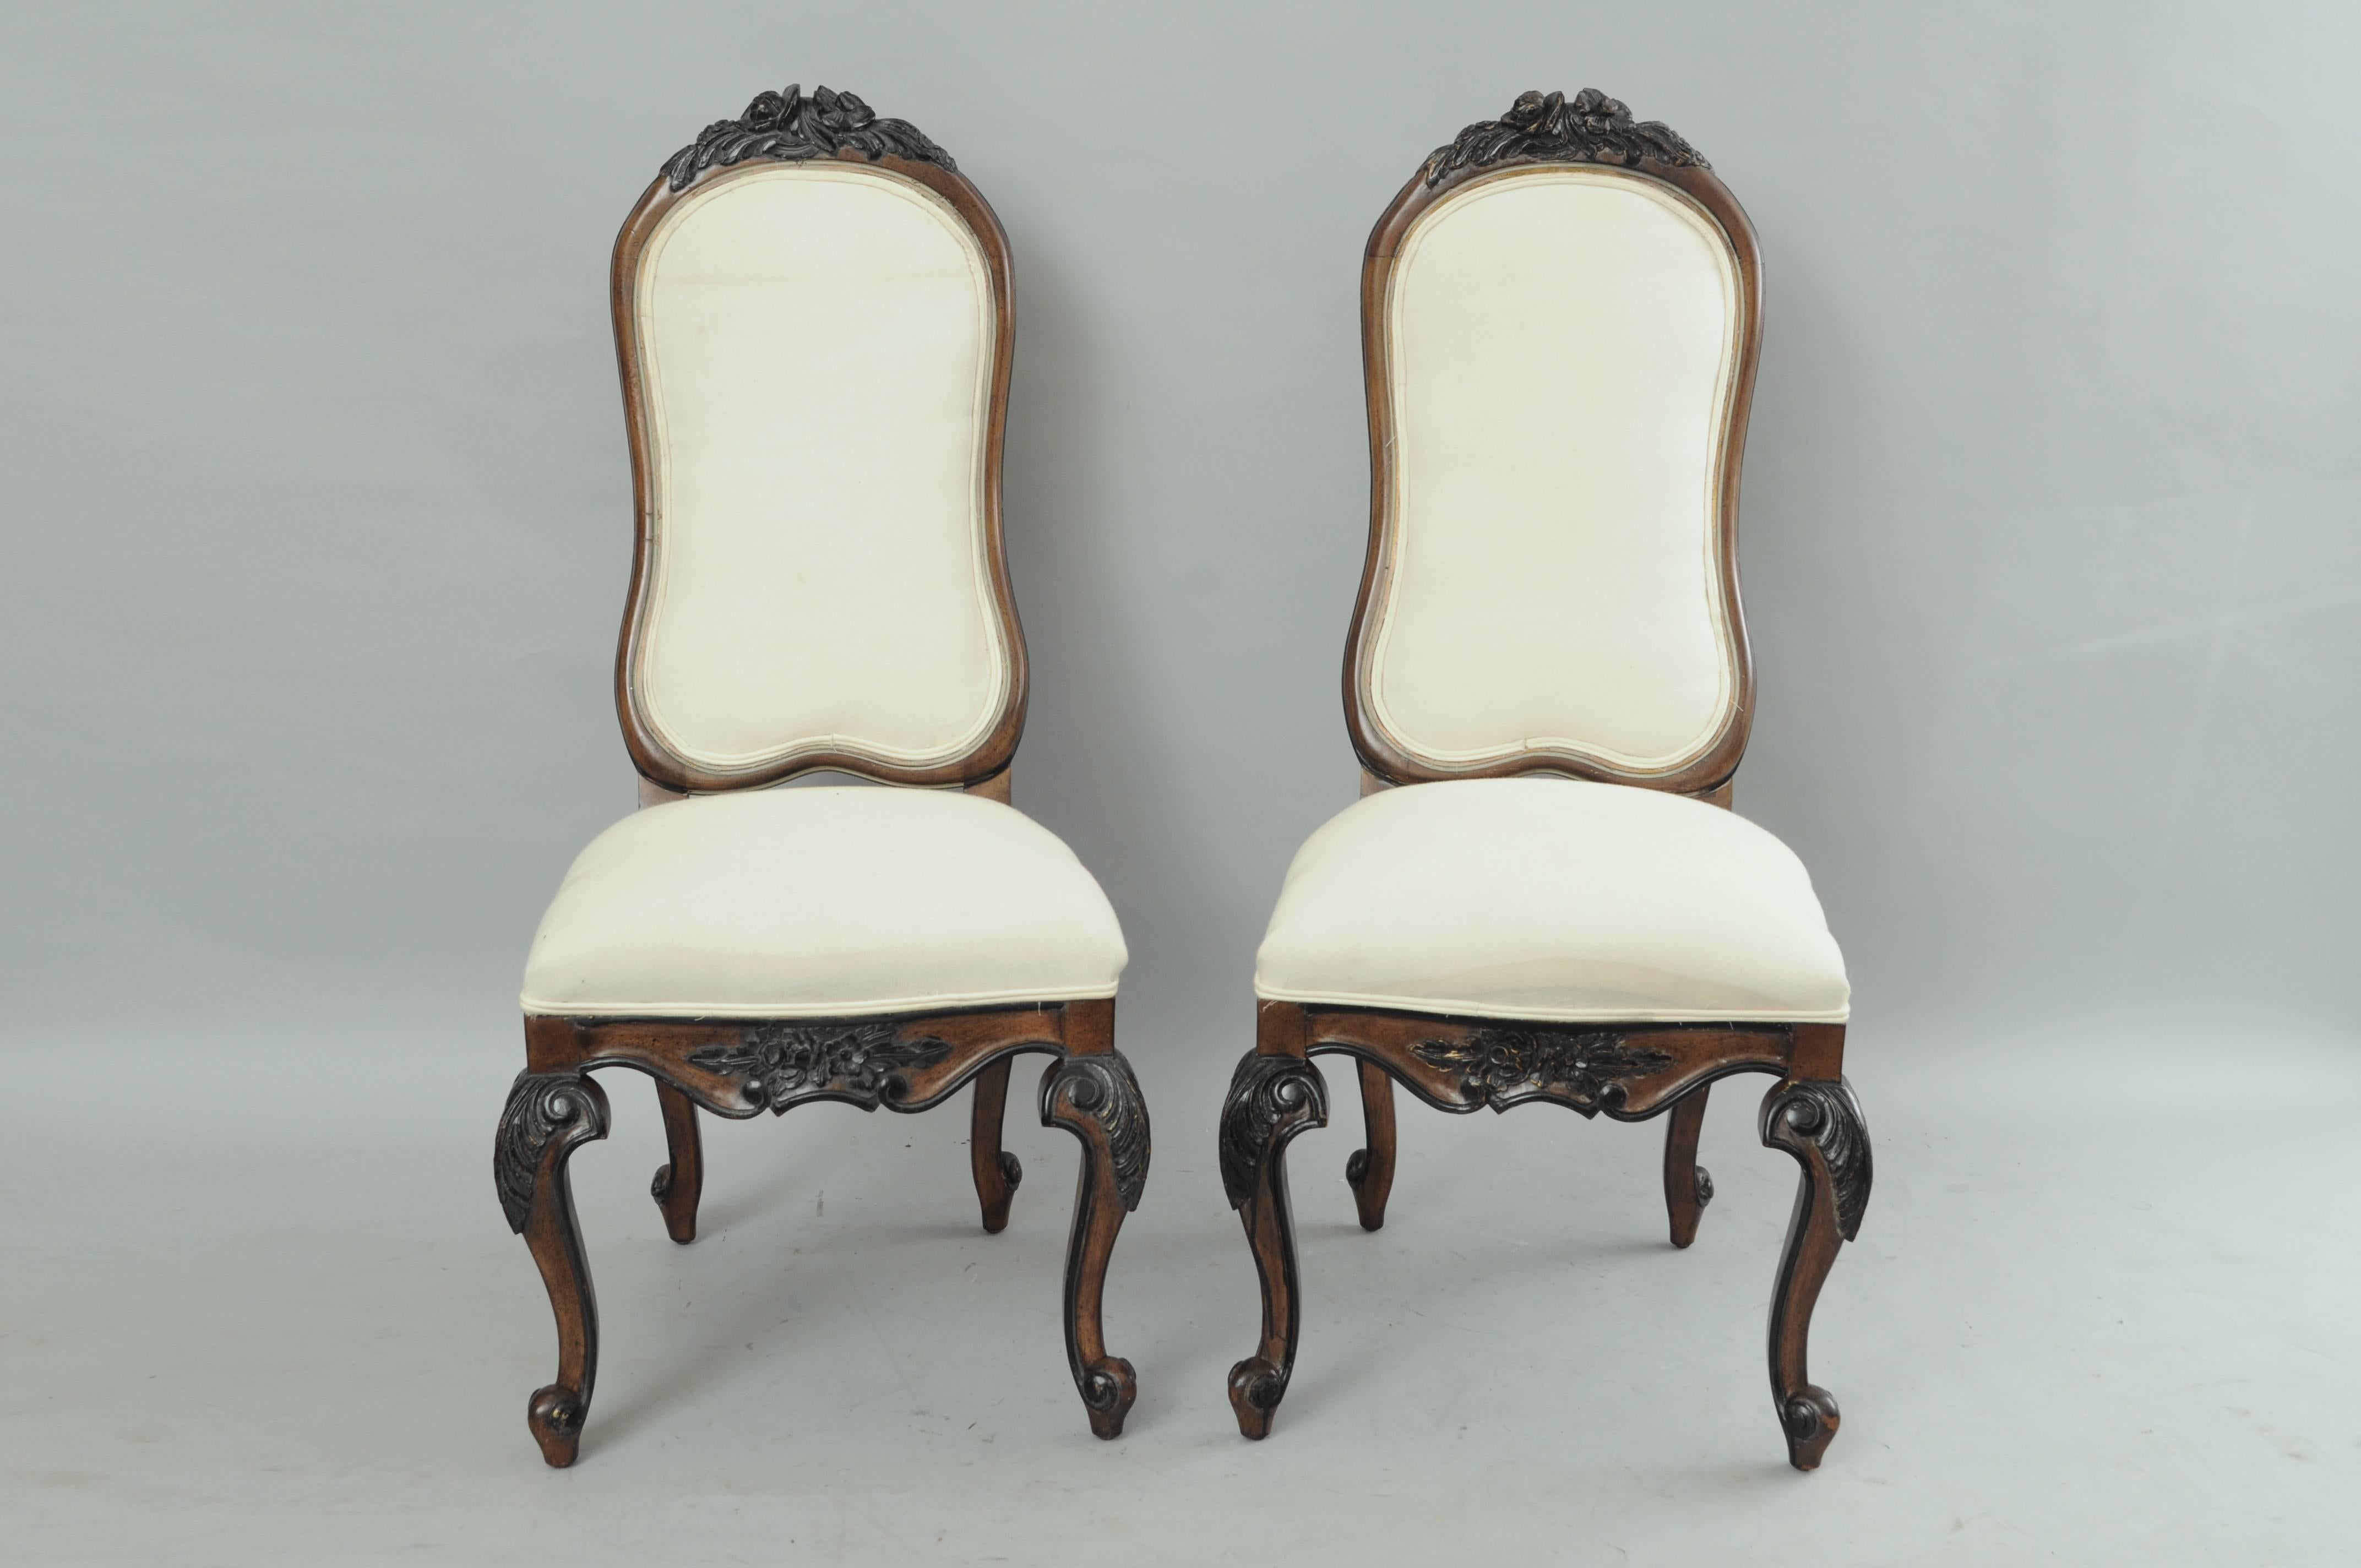 Set of eight Vintage French Country / Italian Baroque style upholstered high back dining room chairs. This set of eight chairs features high quality solid carved wood frames, black distress painted floral accents at the crest, knees and rail. Chairs